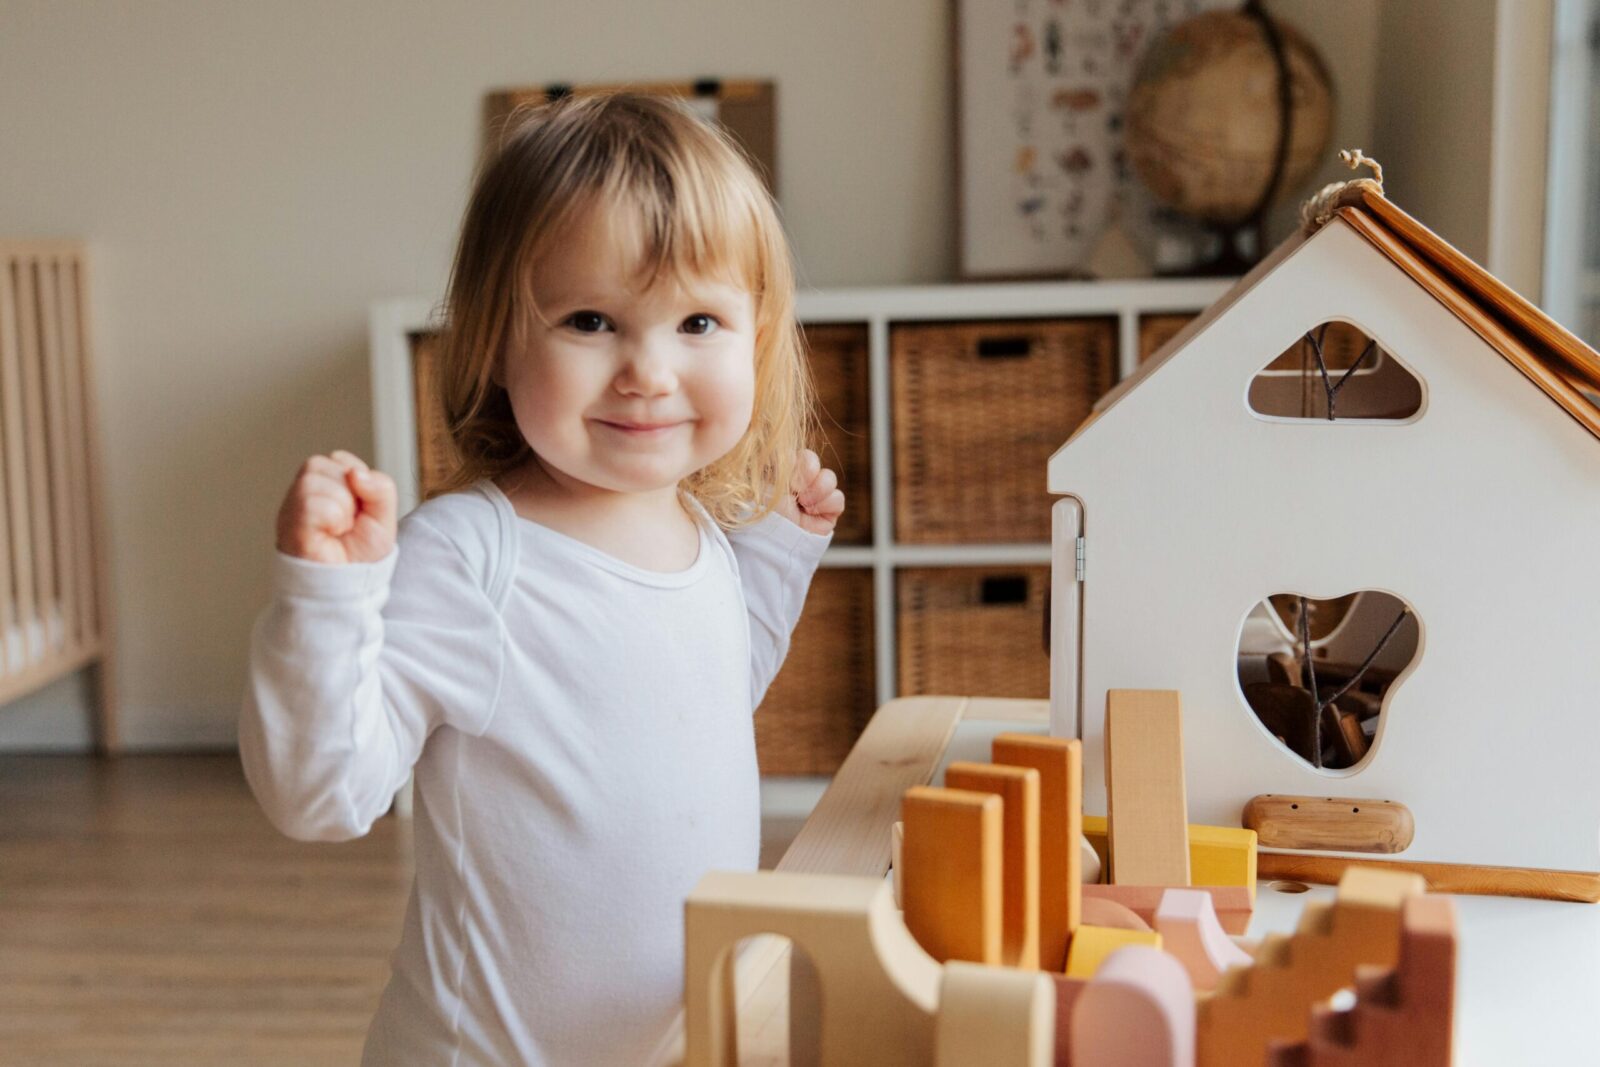 Toy Storage and Interior Design: Top 10 Toy Storage Solutions